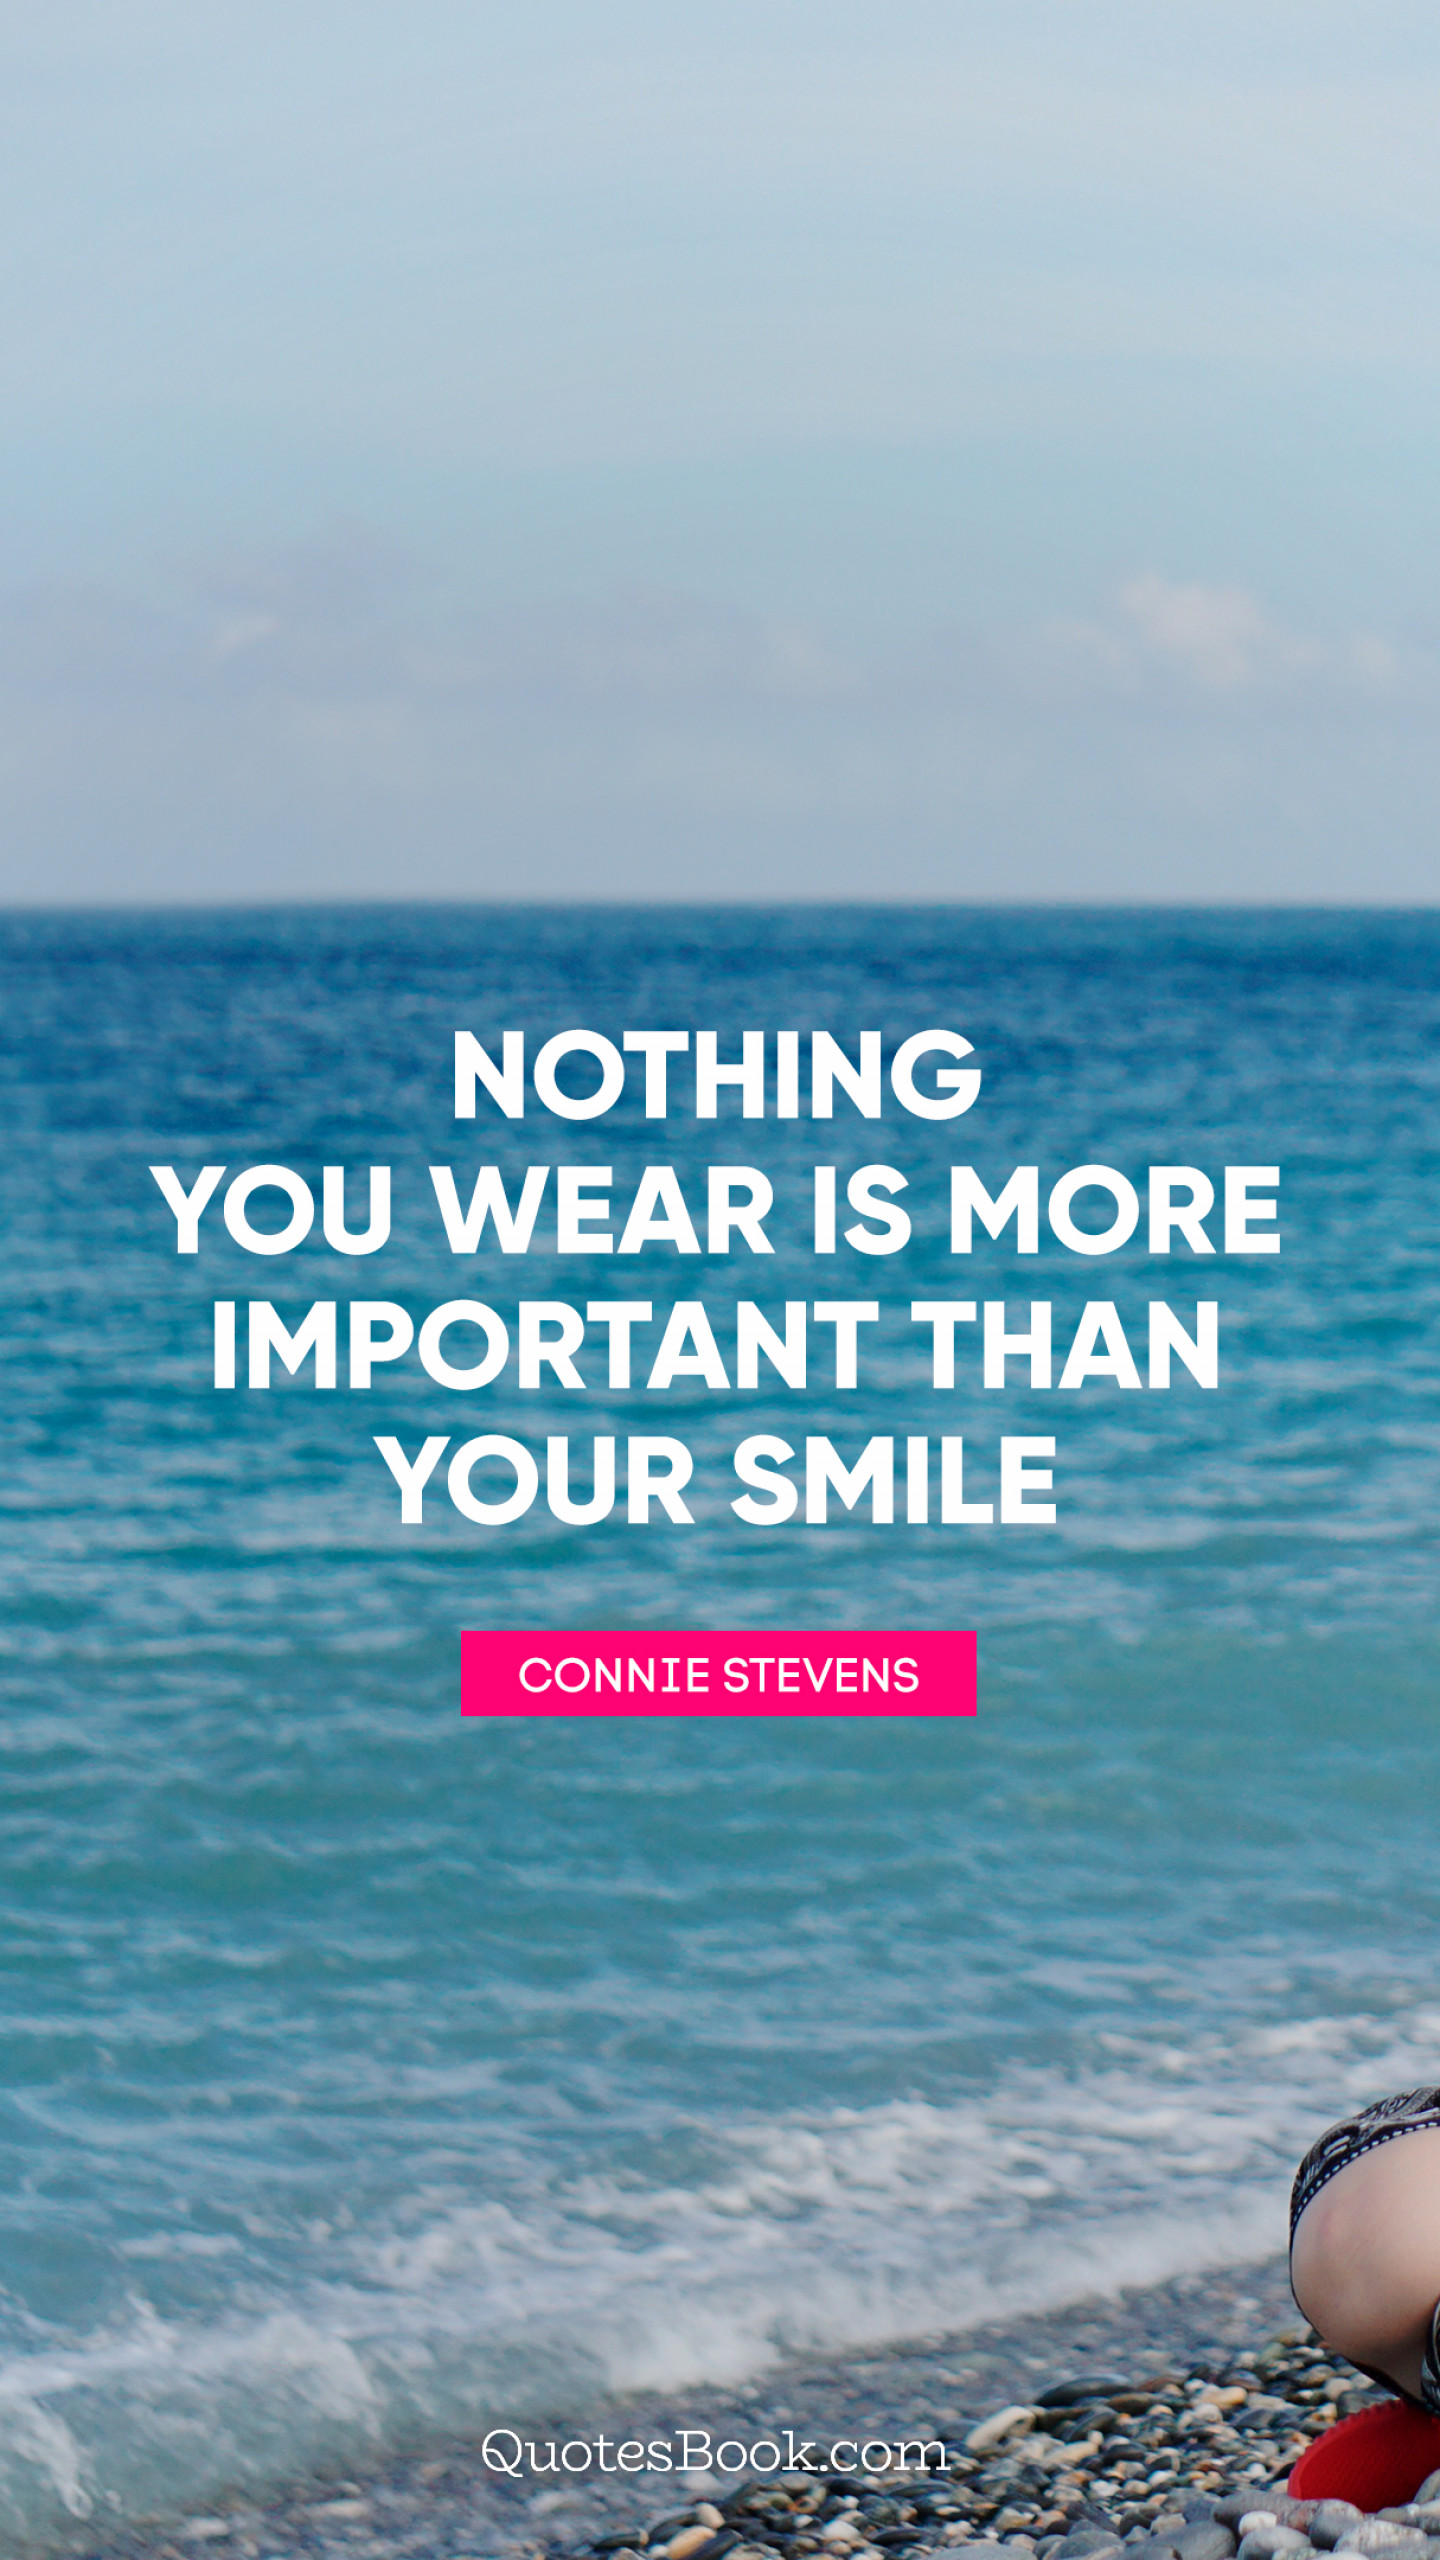 Nothing you wear is more important than your smile. - Quote by Connie